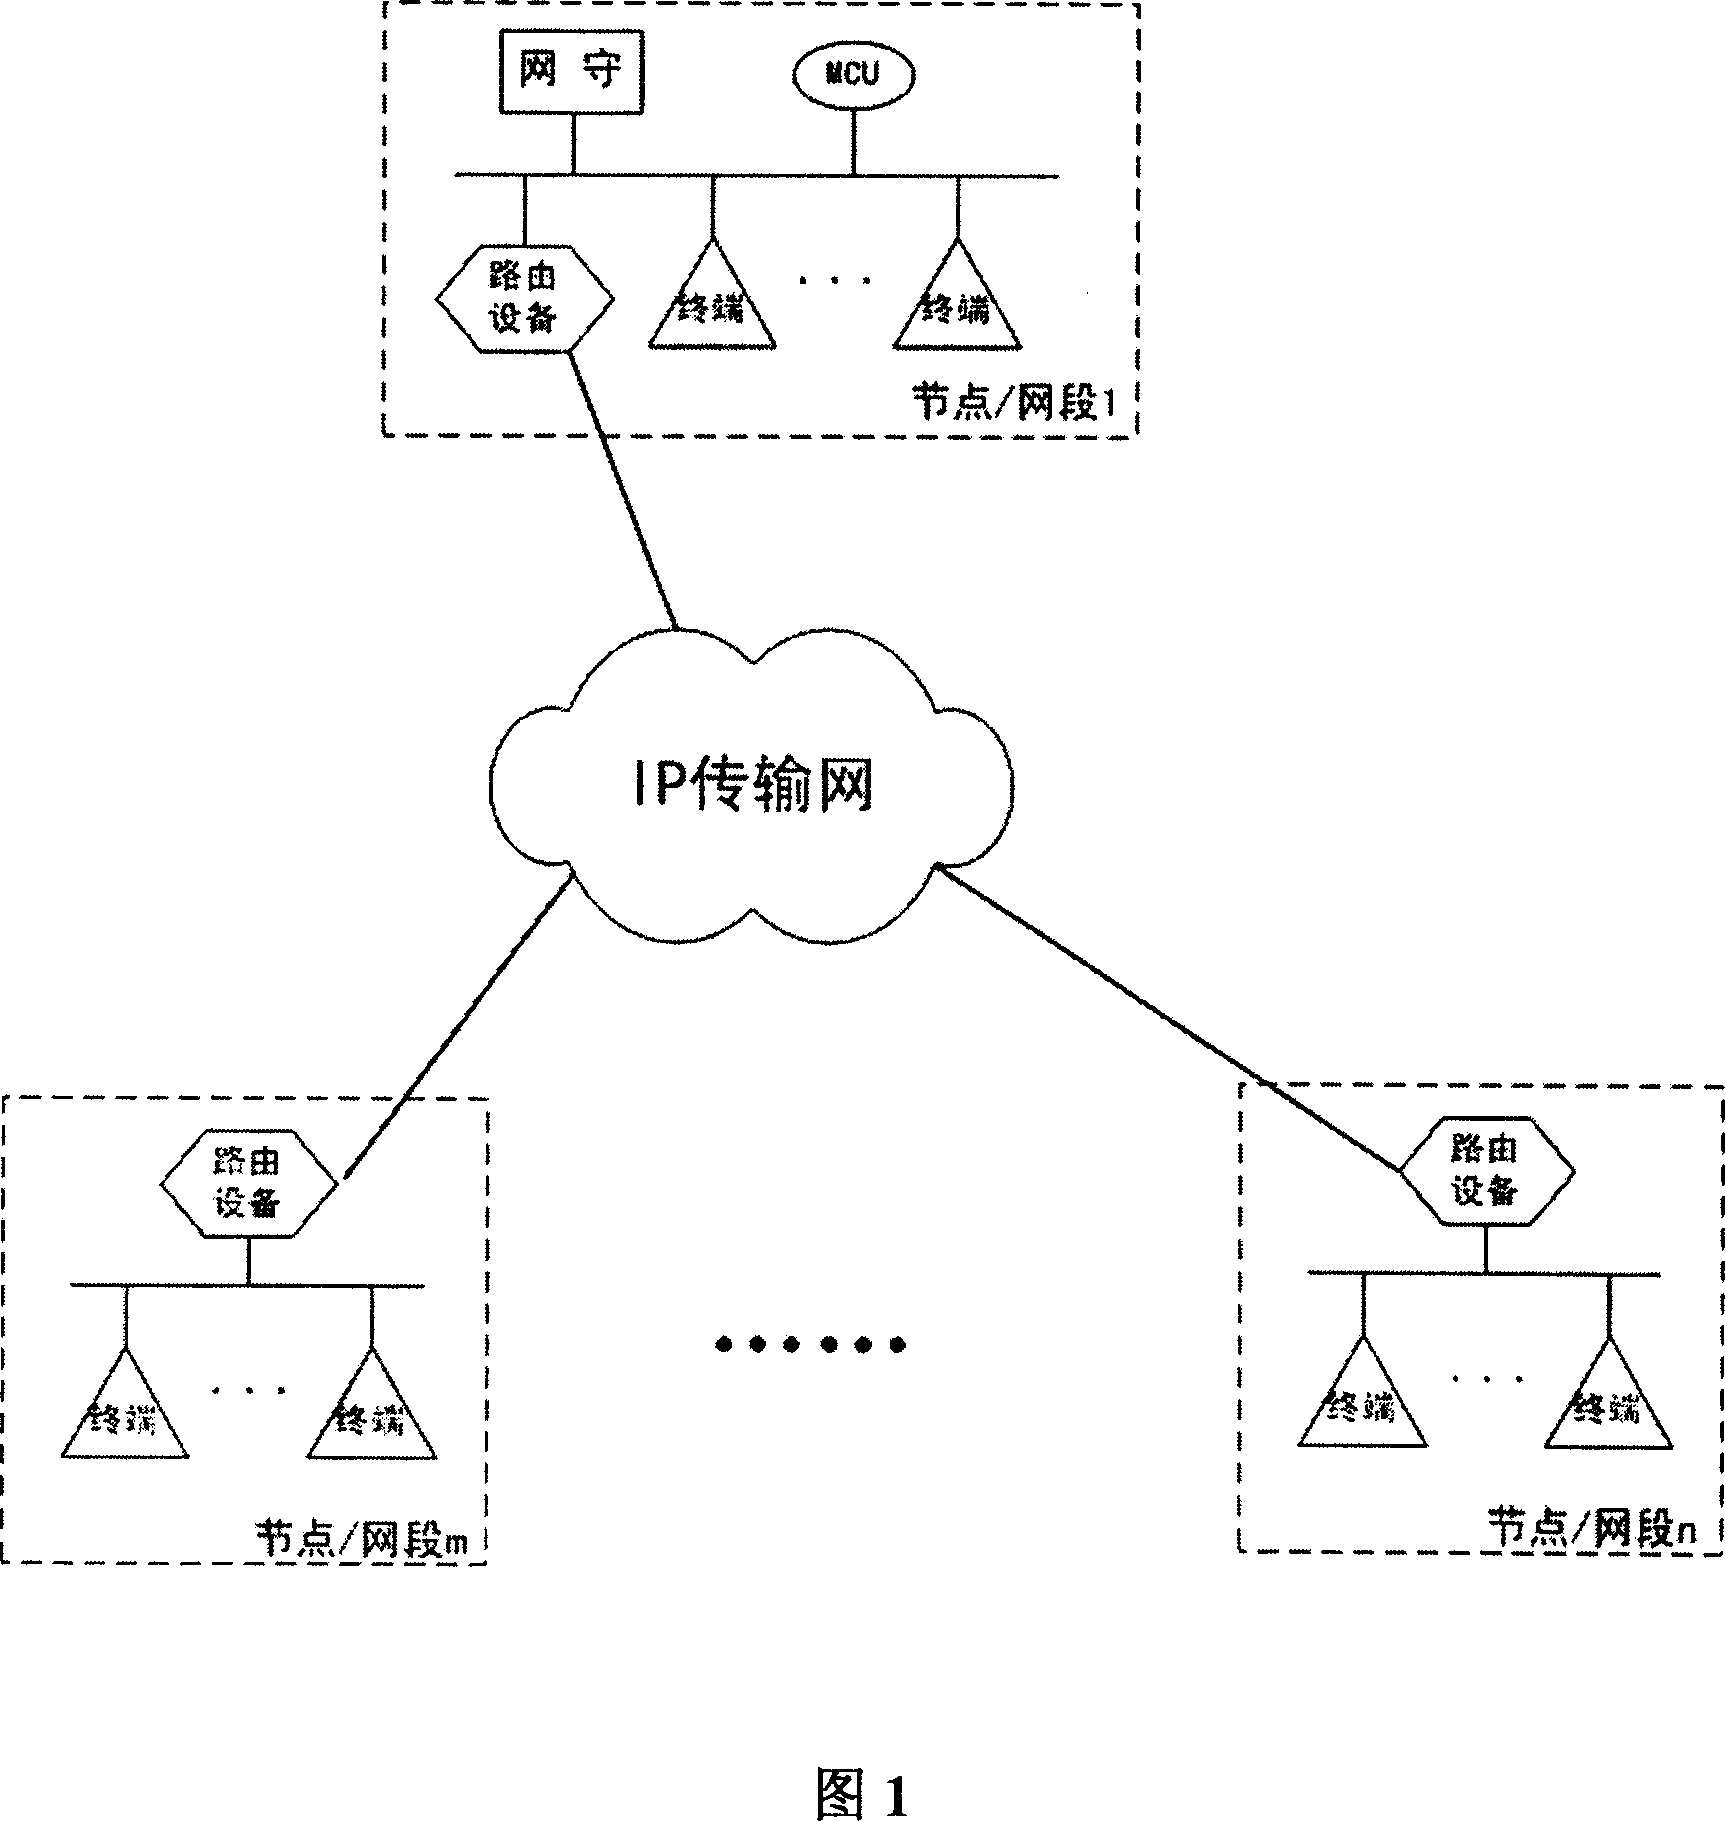 Allocation method of distributed multipoint control unit in IP network multimedia conference system